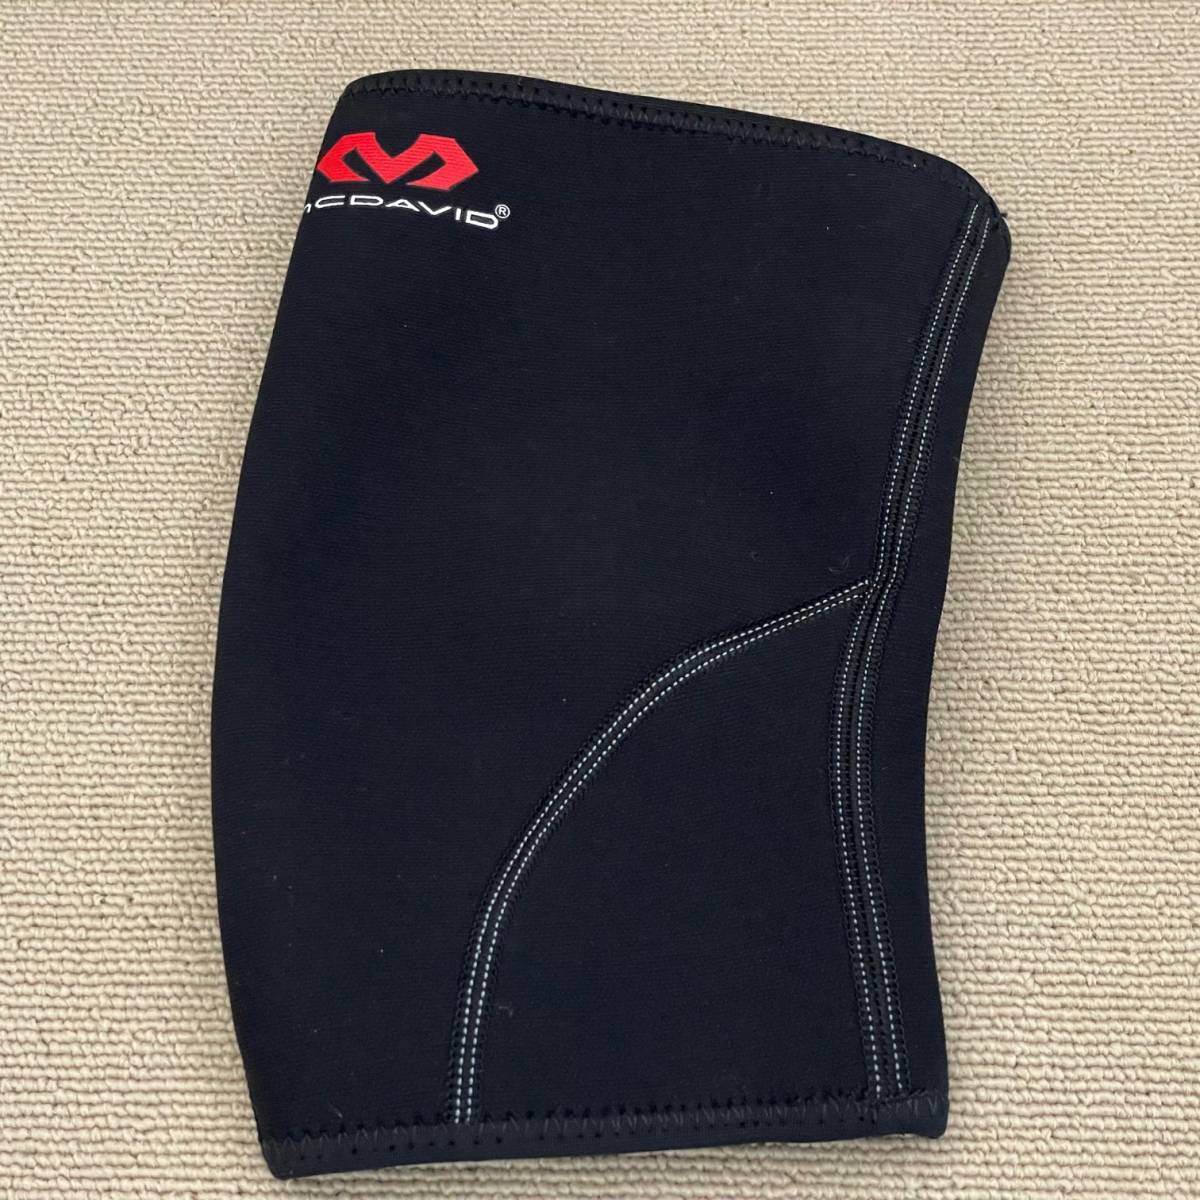  secondhand goods trying on only MCDAVID M401 knee support hi The for soft support black L size heat insulation pressure . protection 